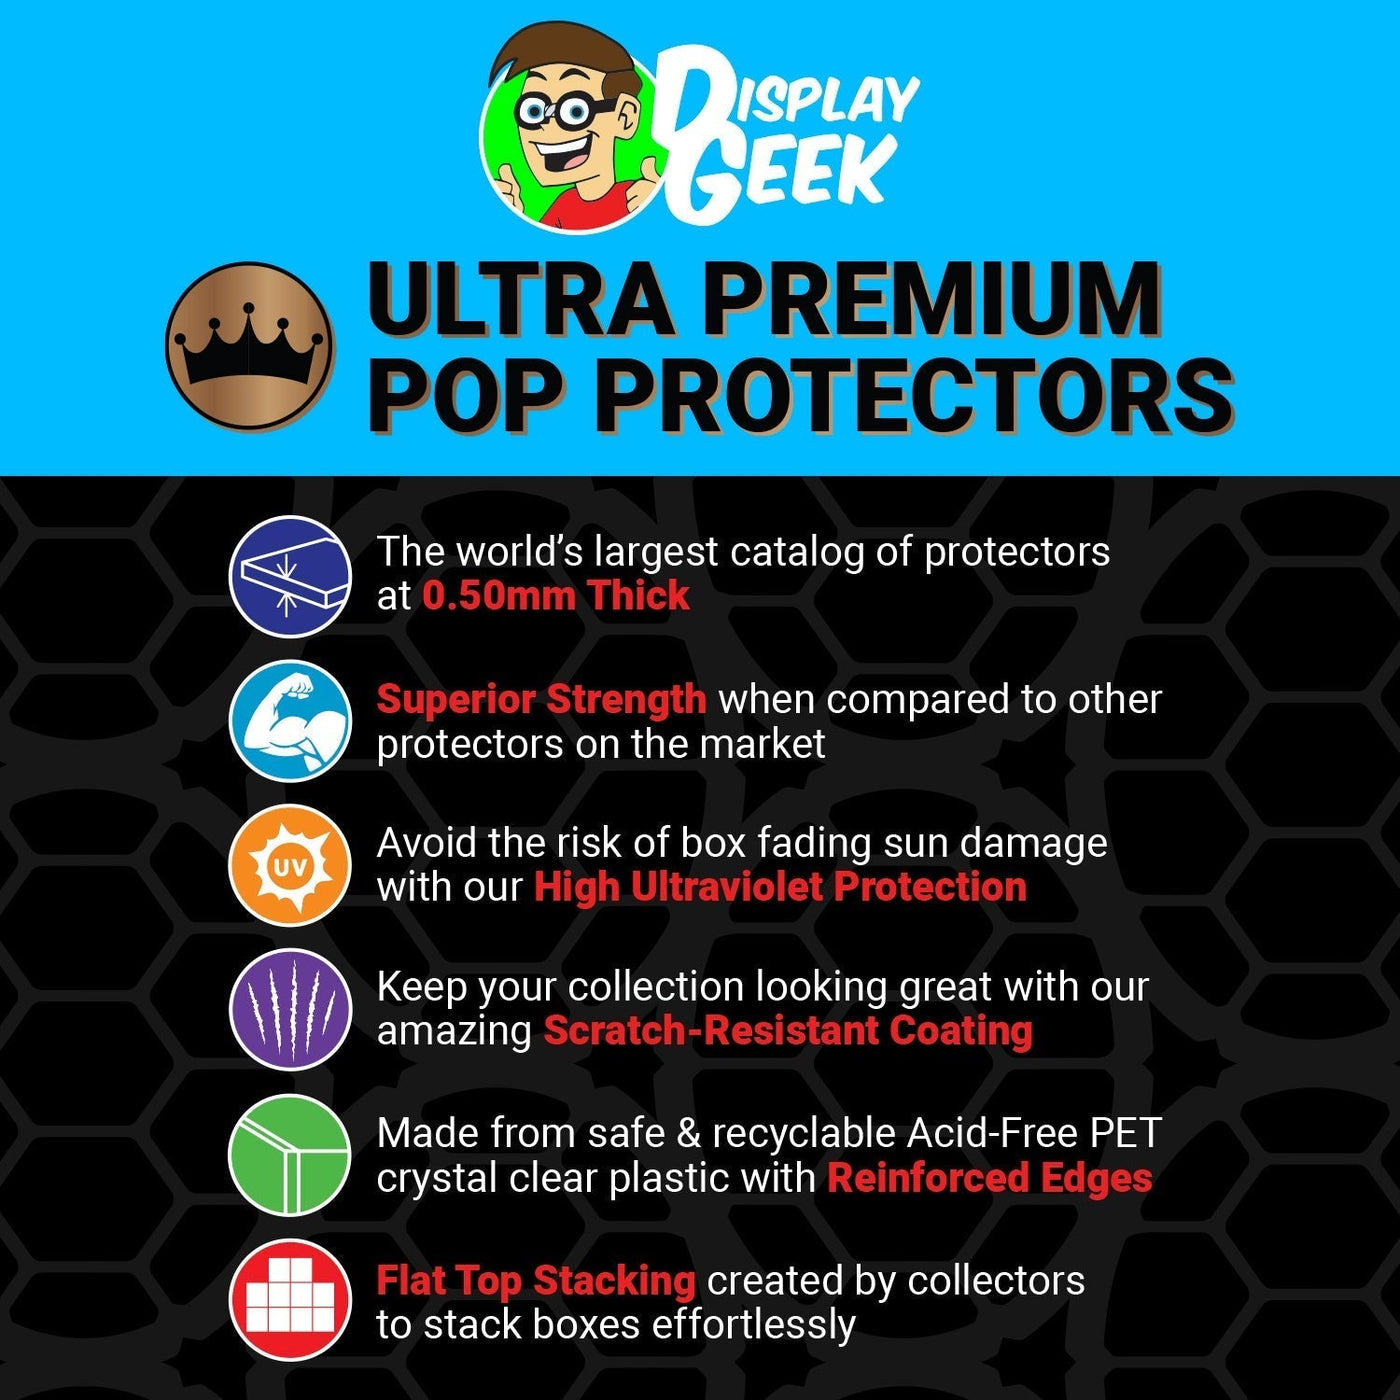 Pop Protector for 4 Pack Luffytaro, Sabo, Roronoa & Jinbe Glow Funko Pop on The Protector Guide App by Display Geek